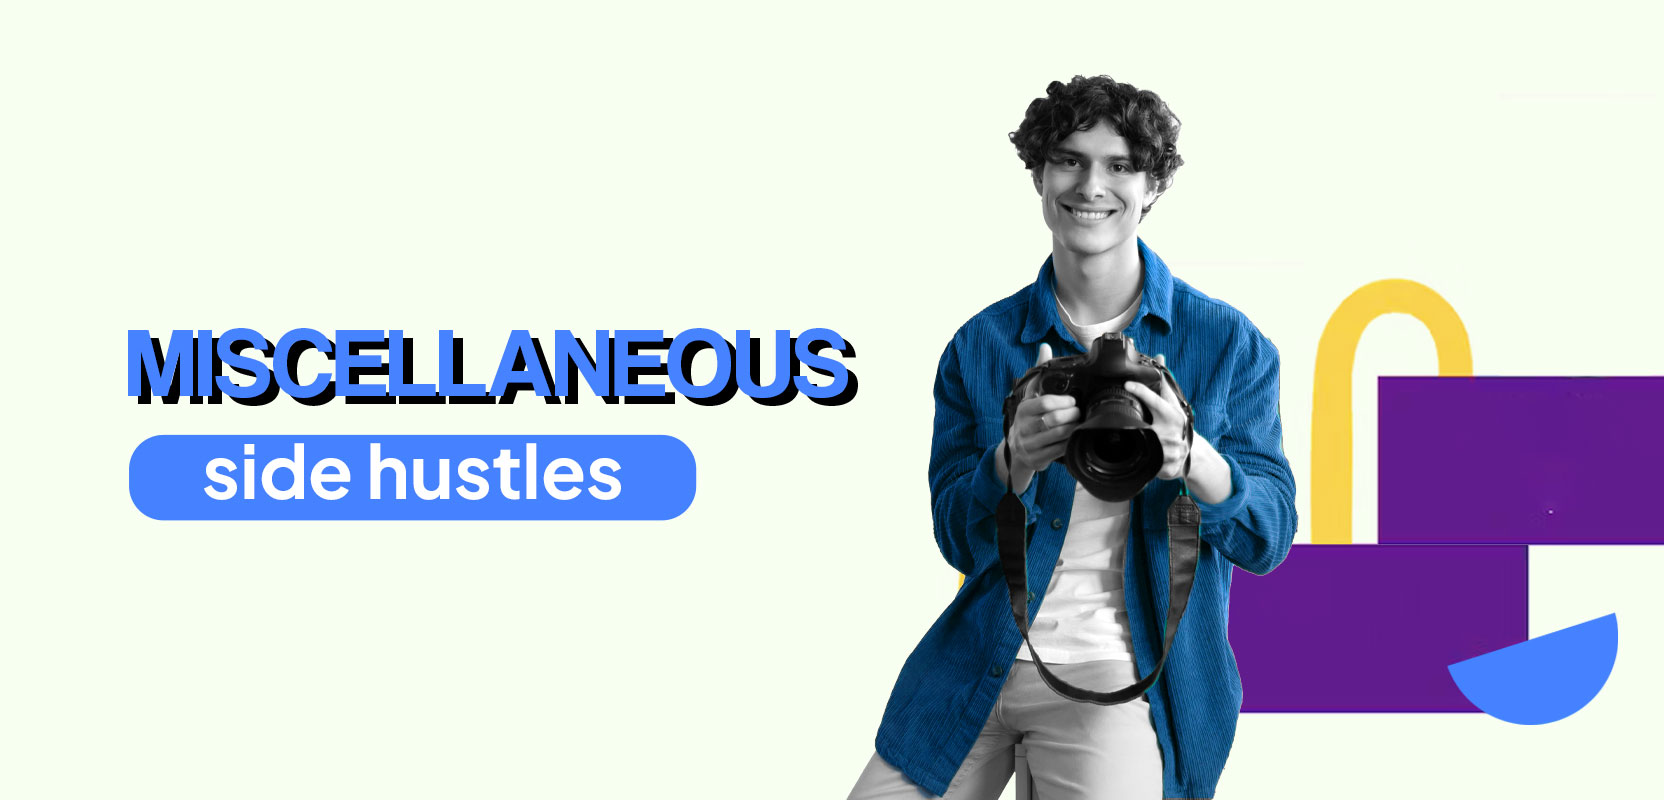 Man holding a camera representing miscellaneous side hustles